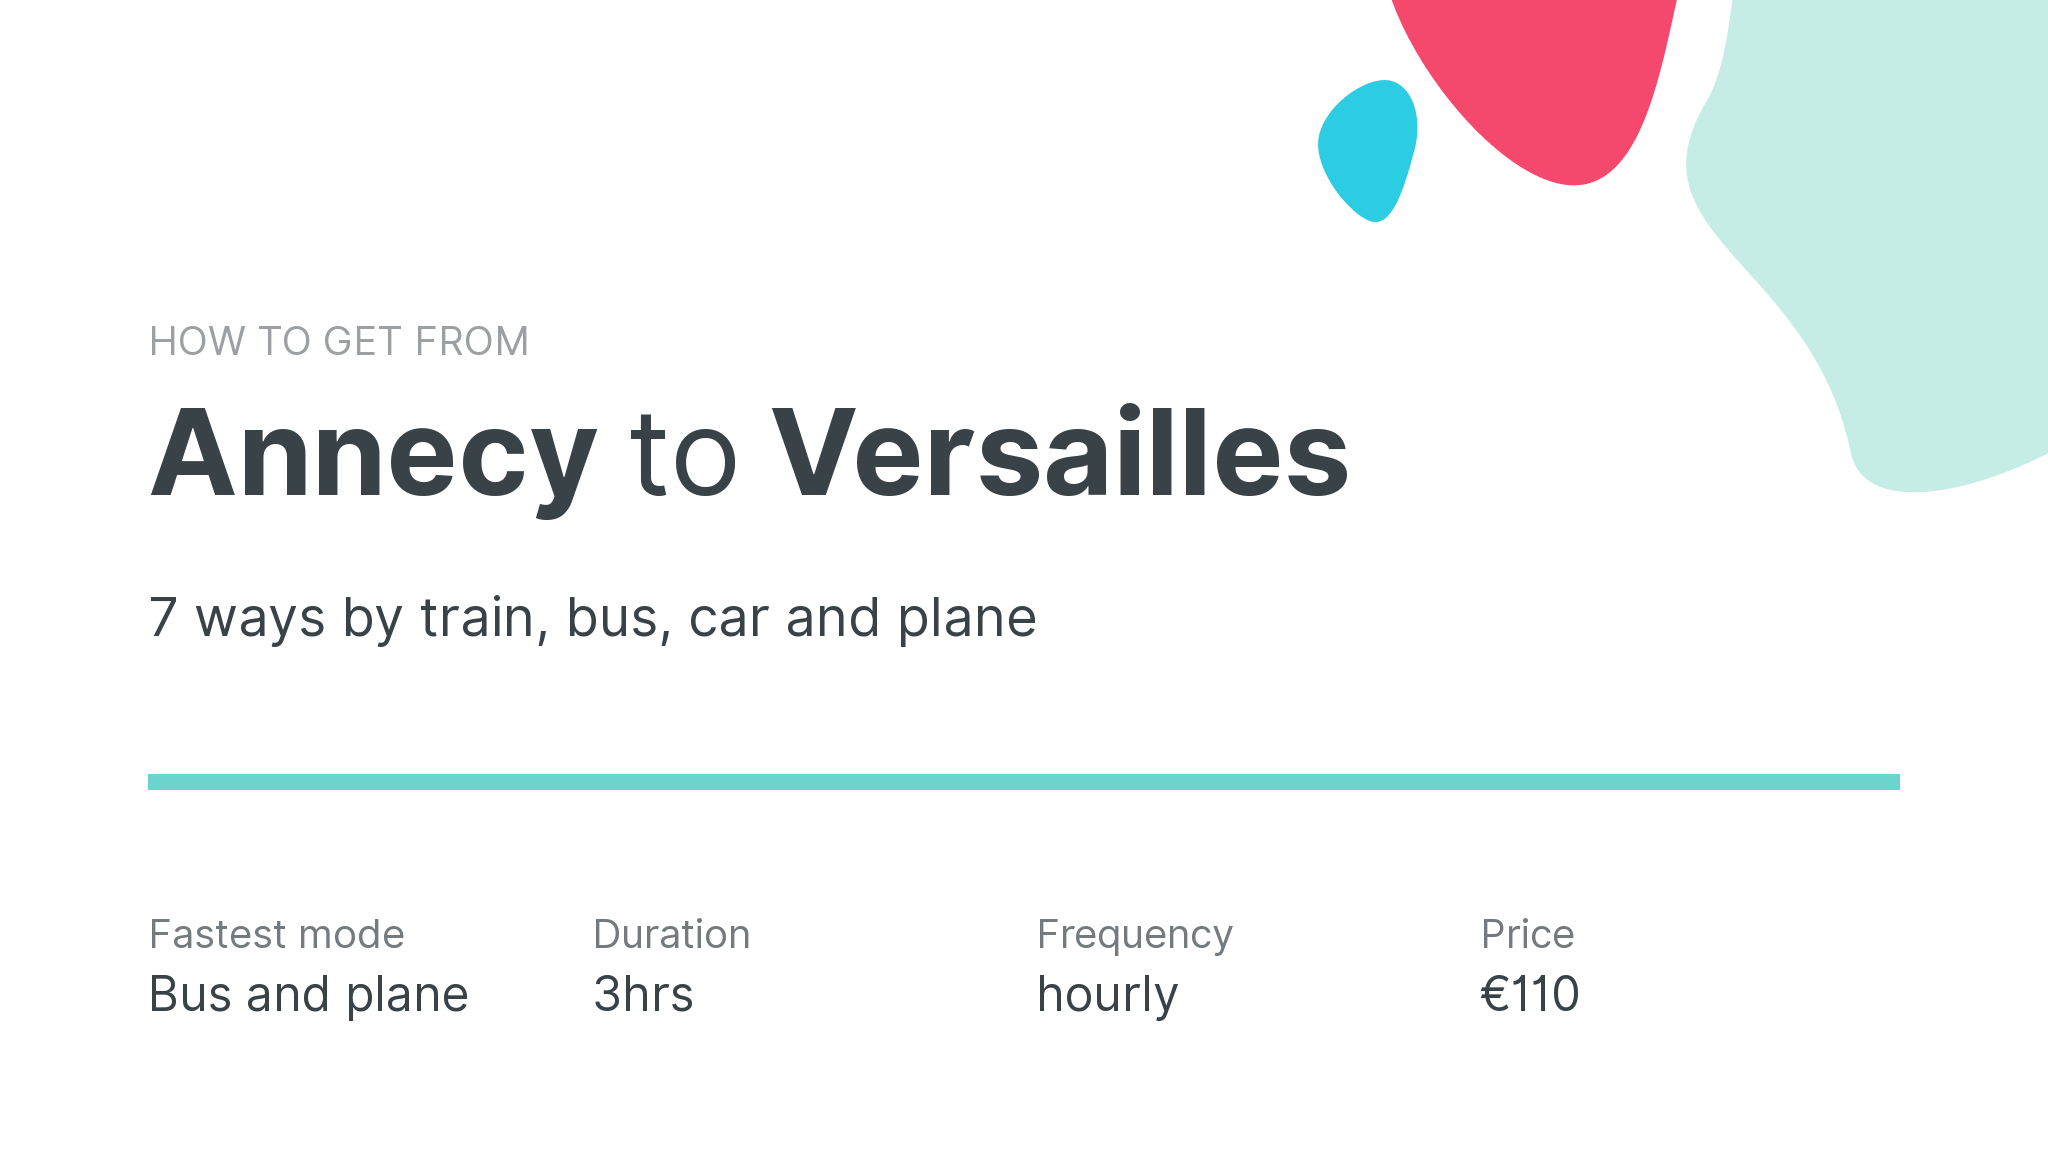 How do I get from Annecy to Versailles